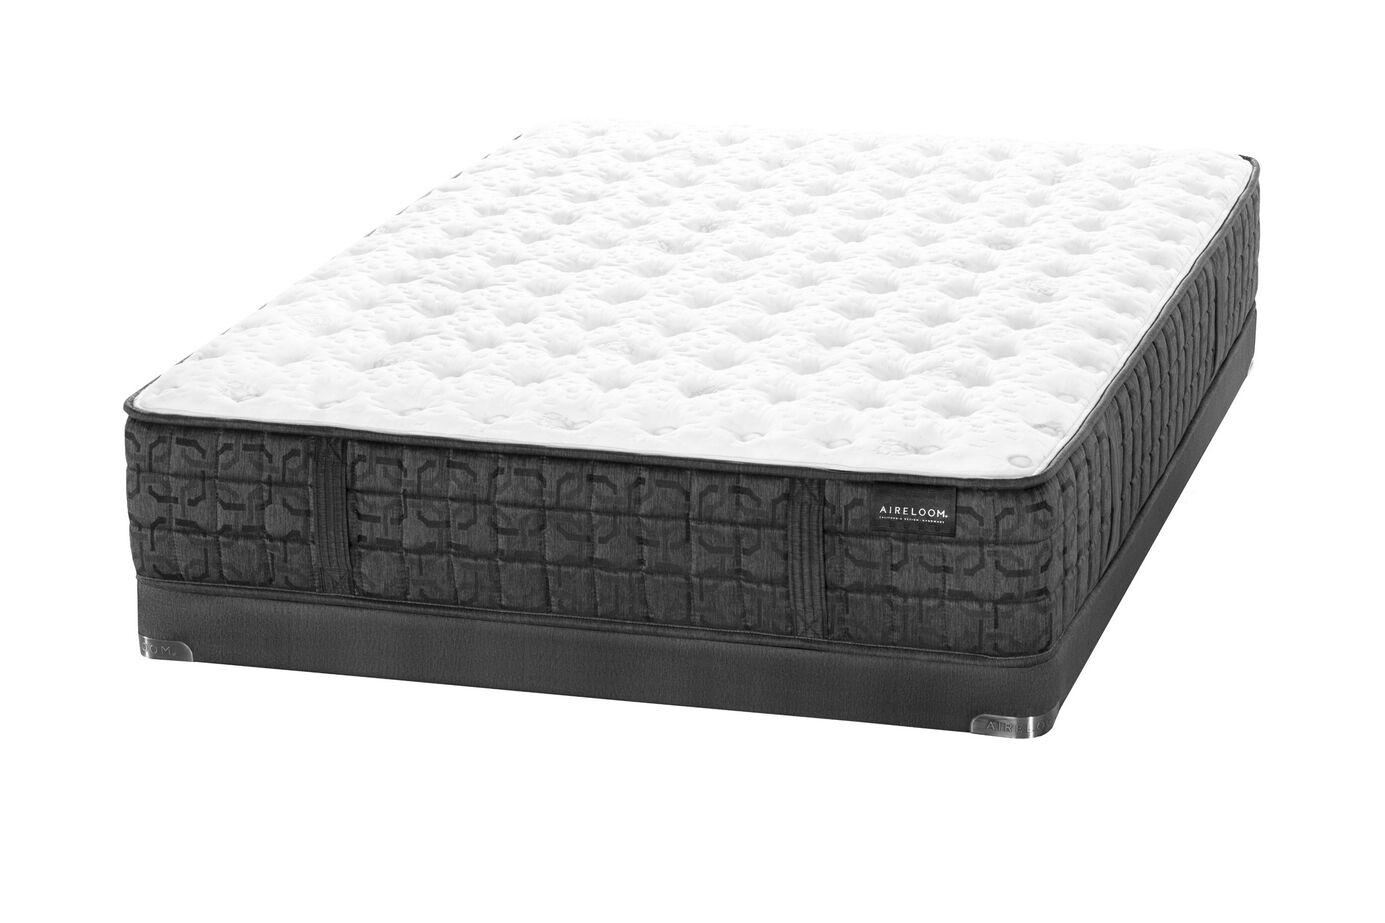 Aireloom Pacific Bay Gemini Firm Mattress 11.5" image number 4